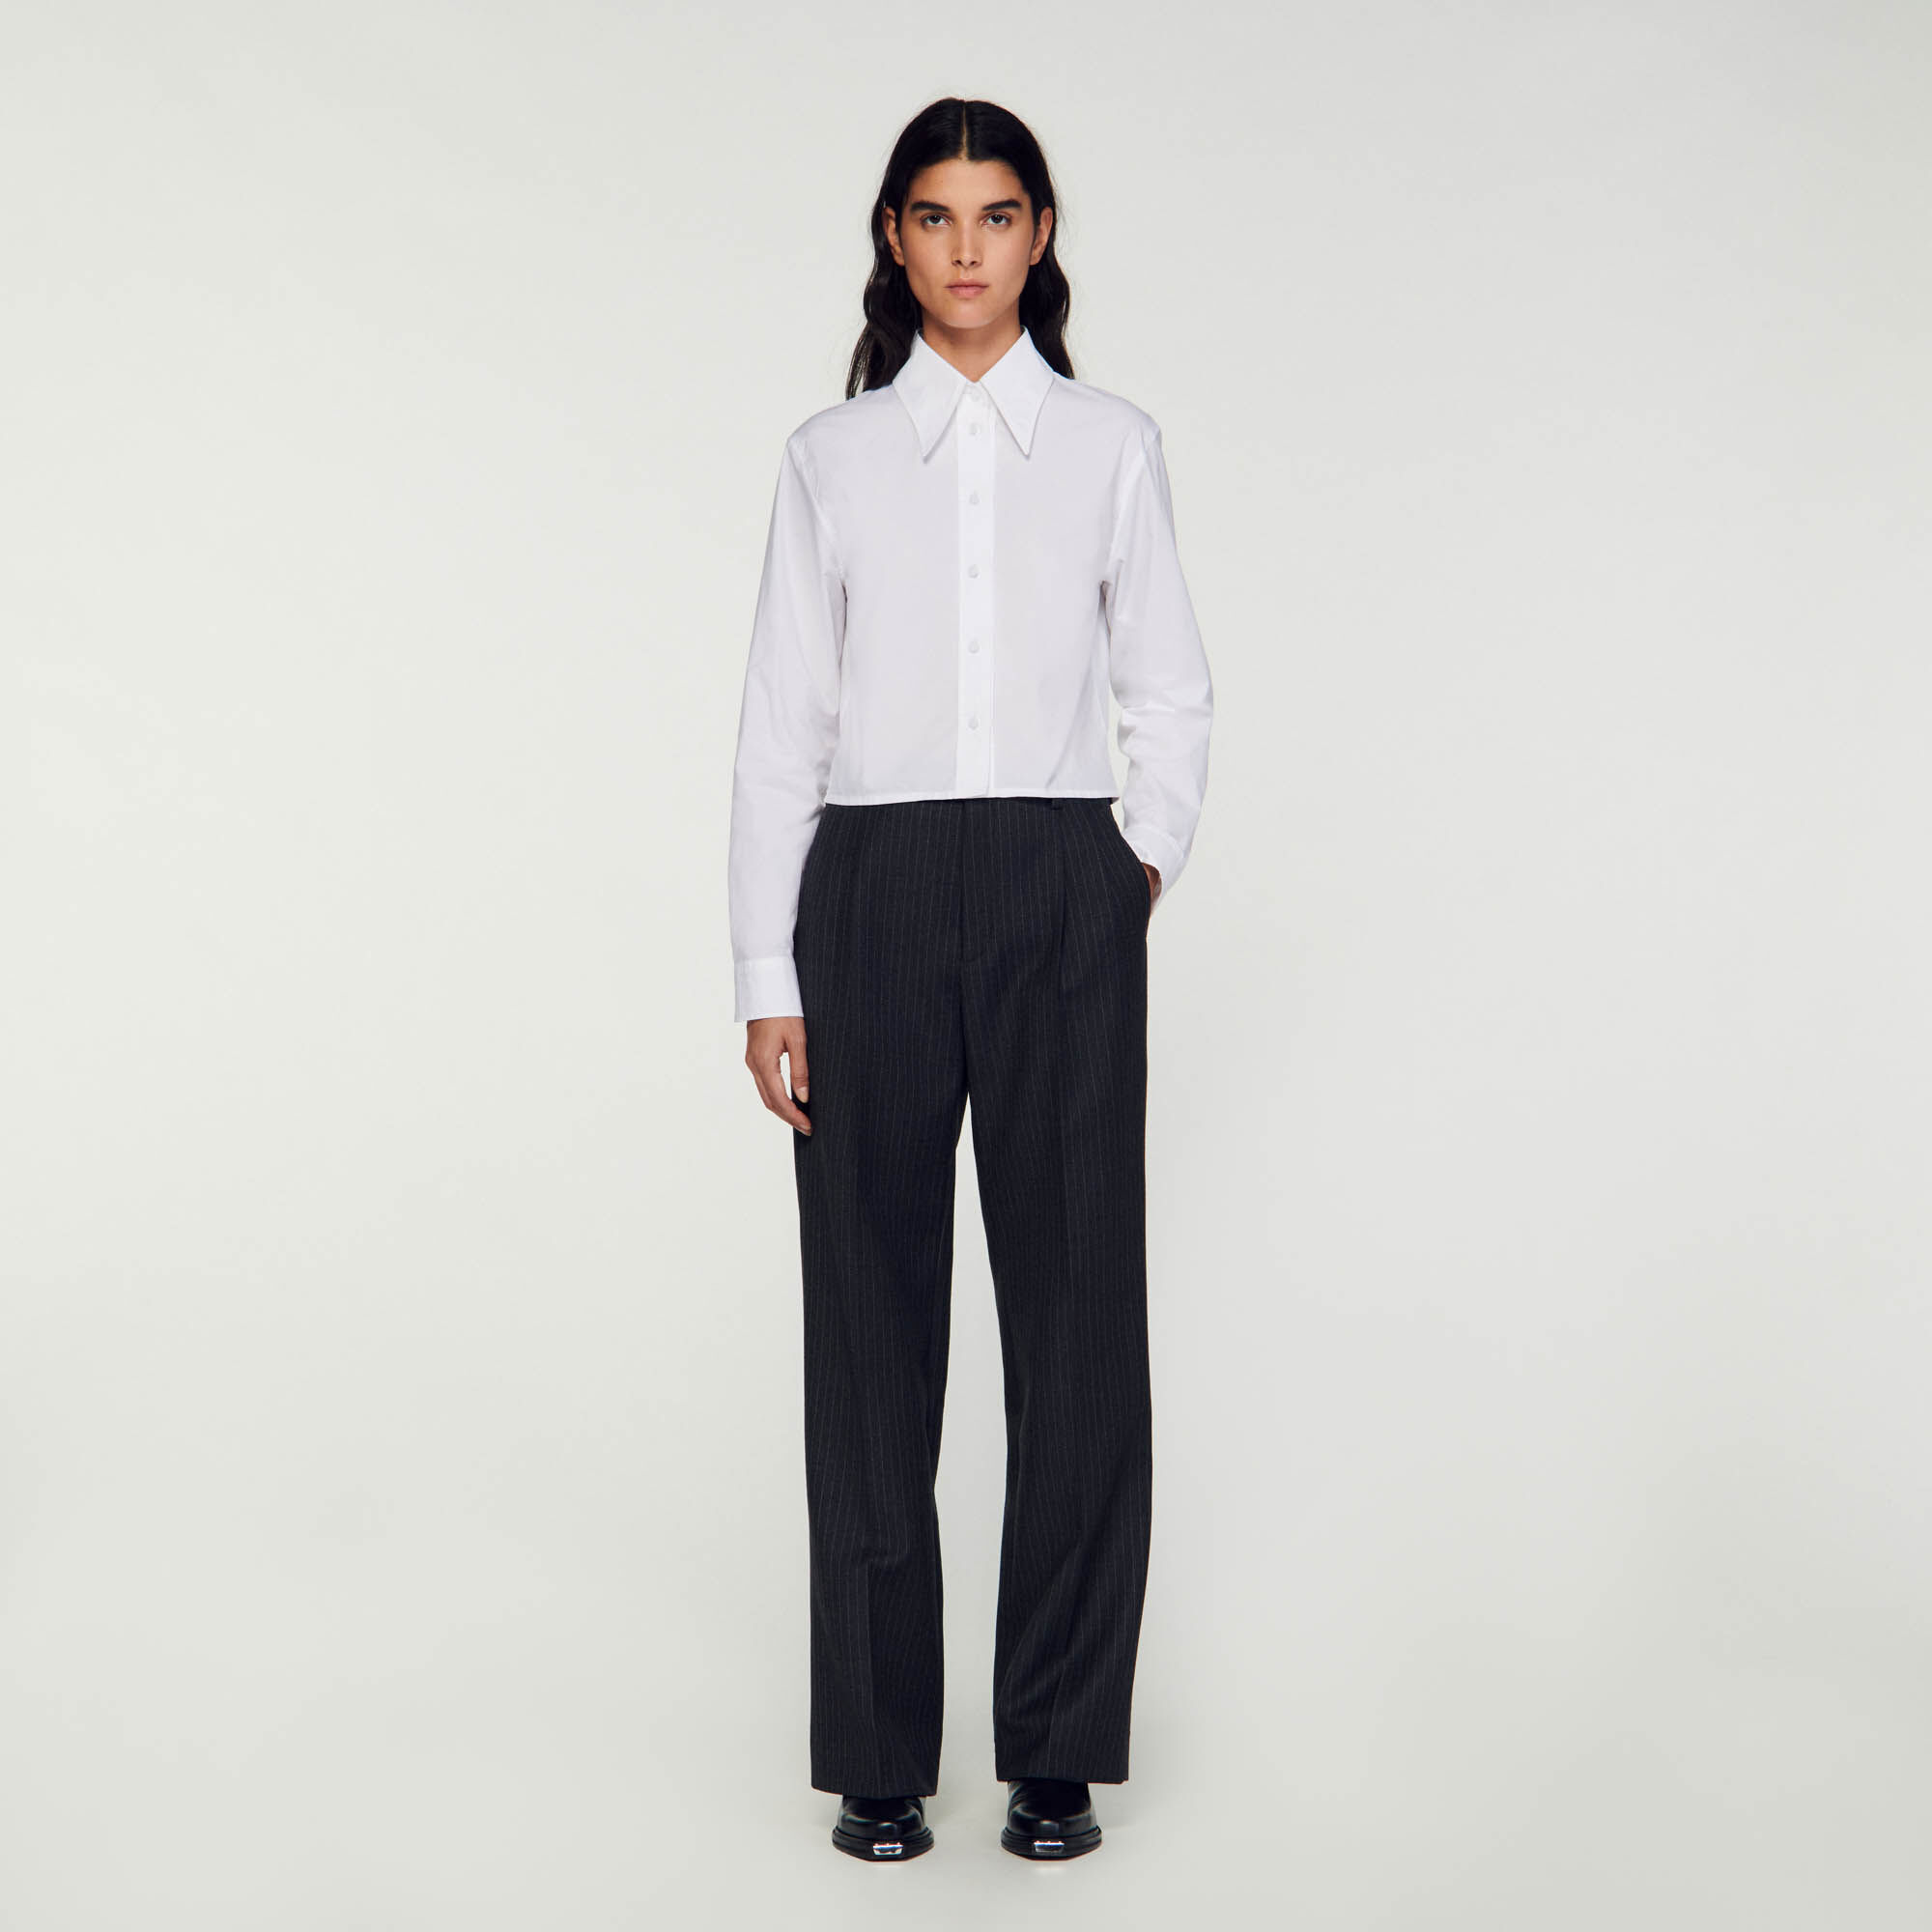 The Petite Wide Leg Pant in Airy Wool Blend - Curvy Fit